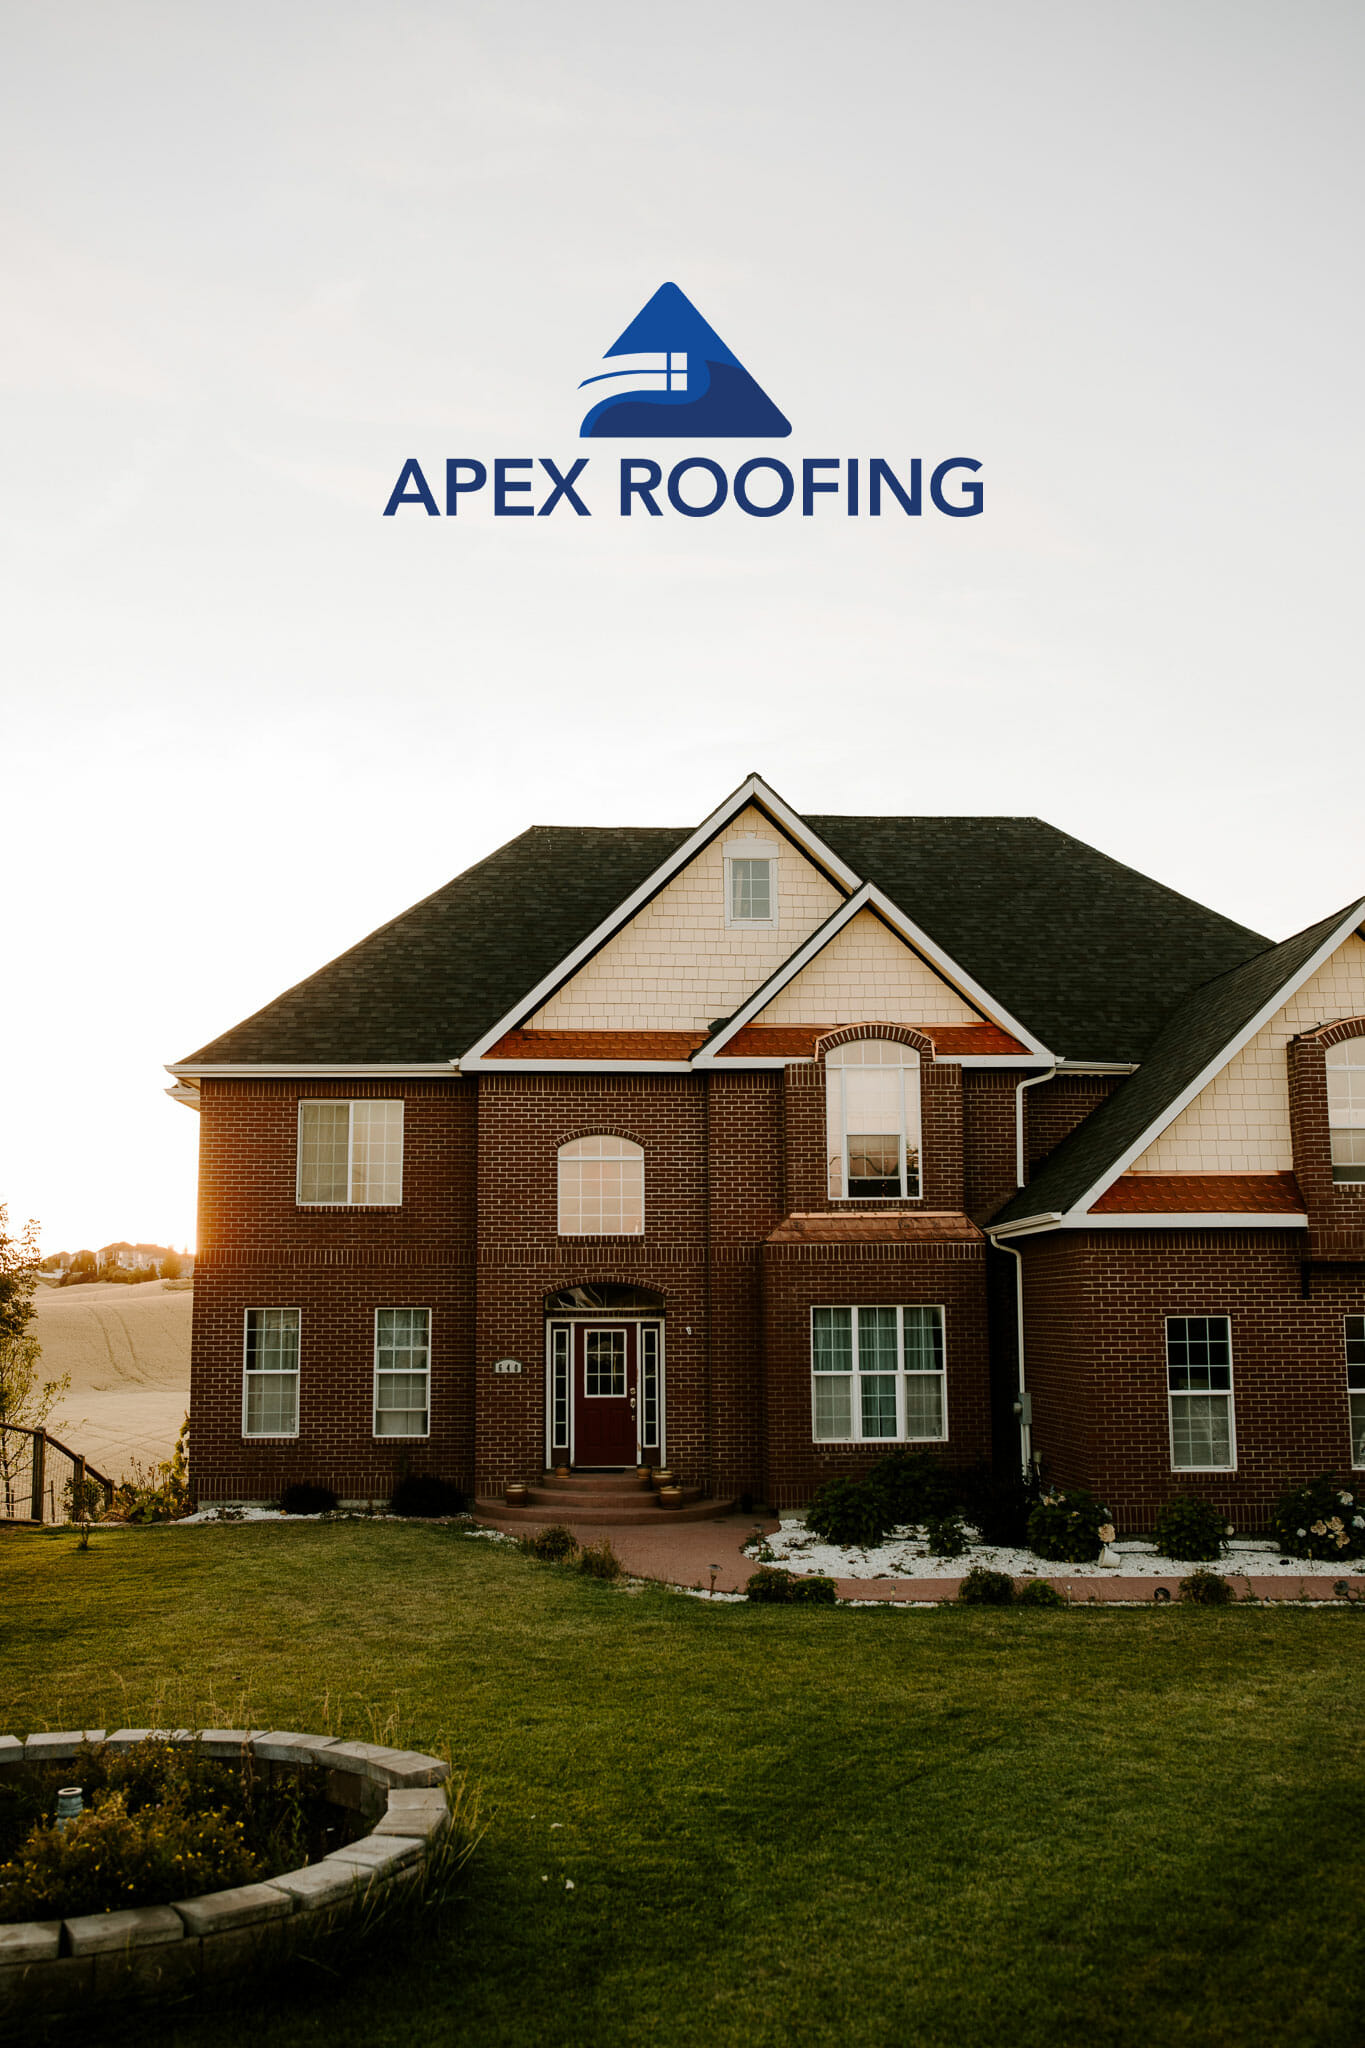 Apex Roofing - Trusted Roofing Company